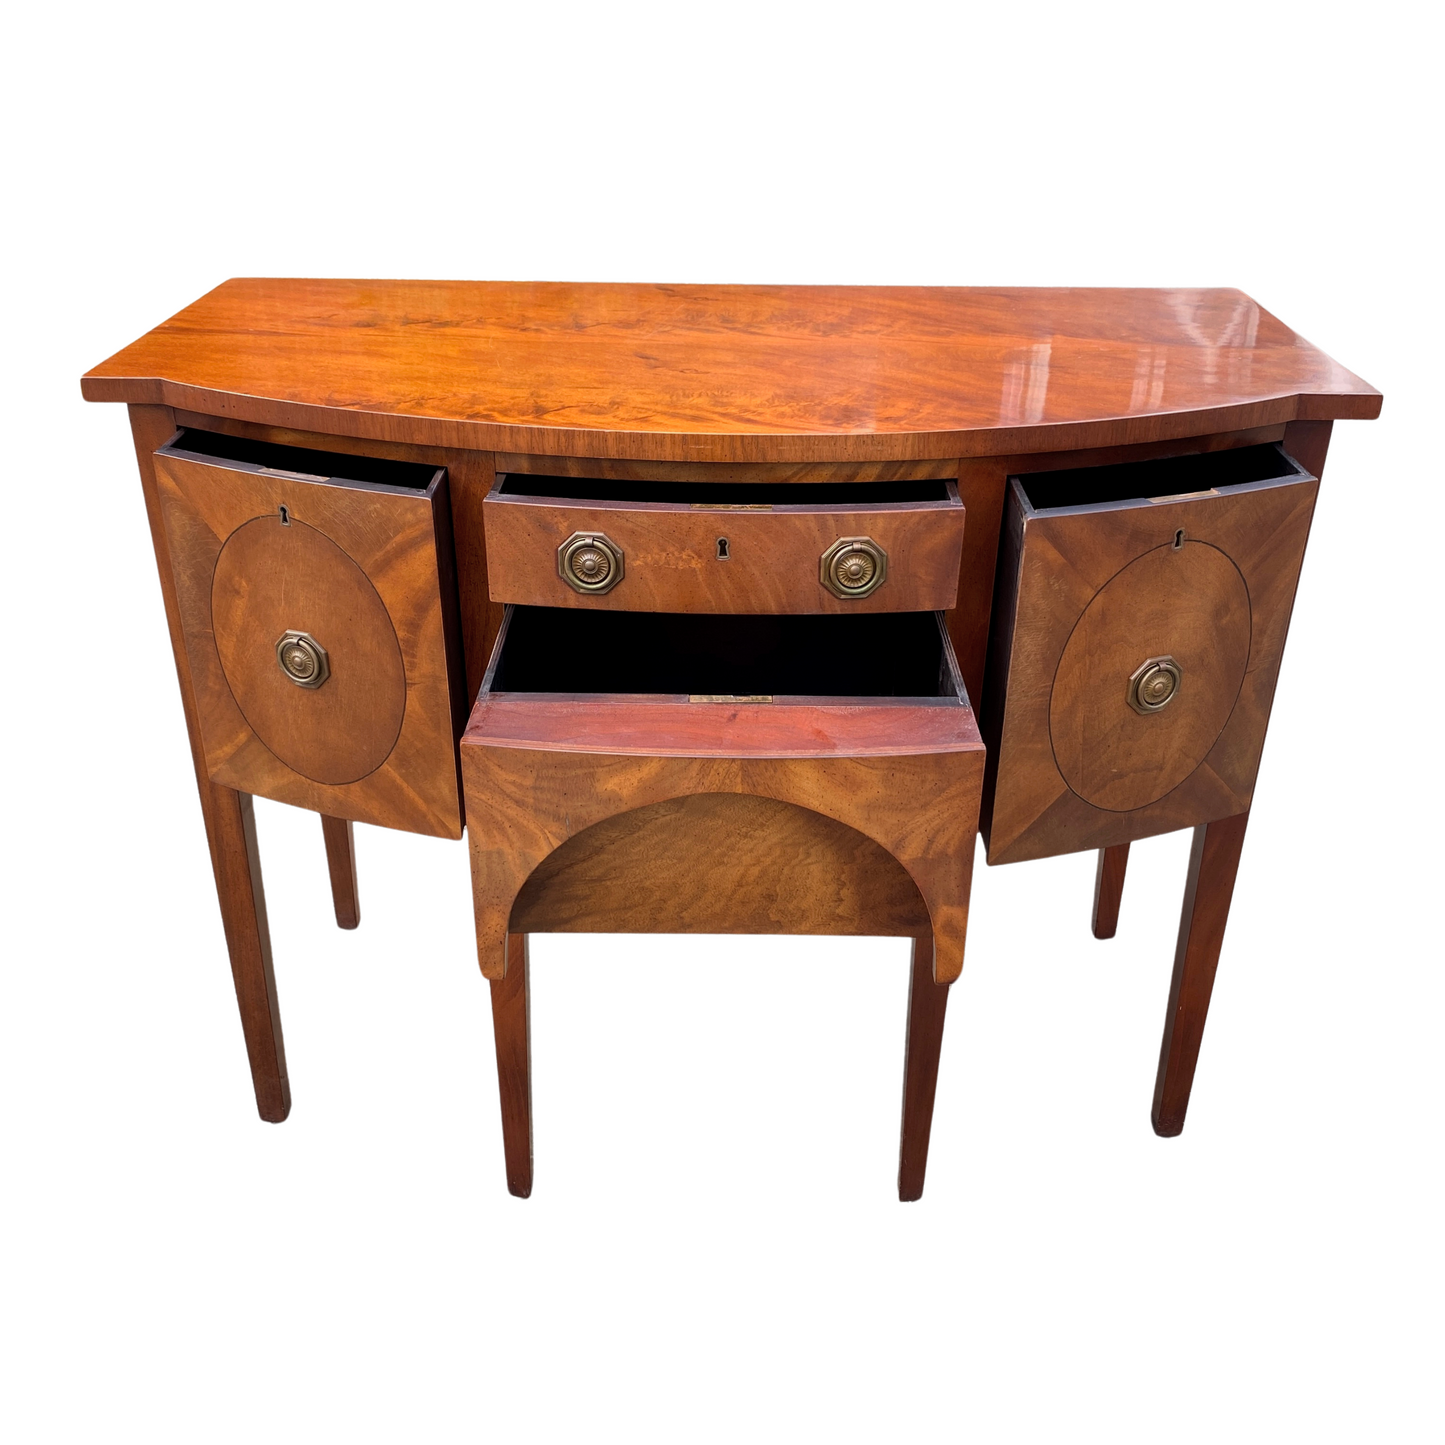 Federal Bow-Front Maple Sideboard